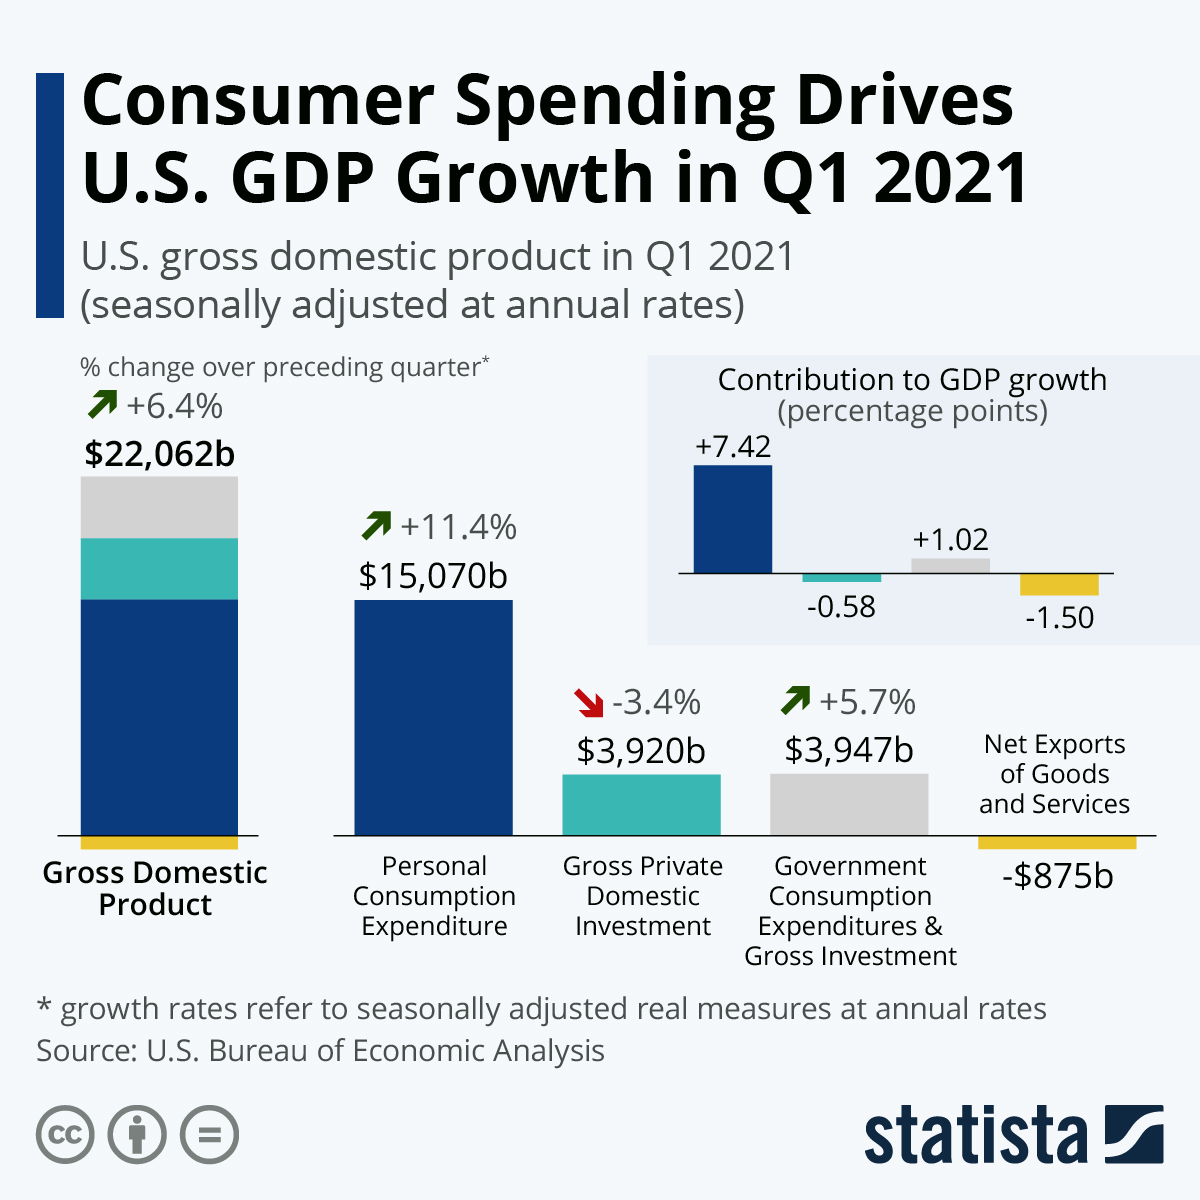 Consumer Spending Drives U.S. GDP Growth in Q1 2021